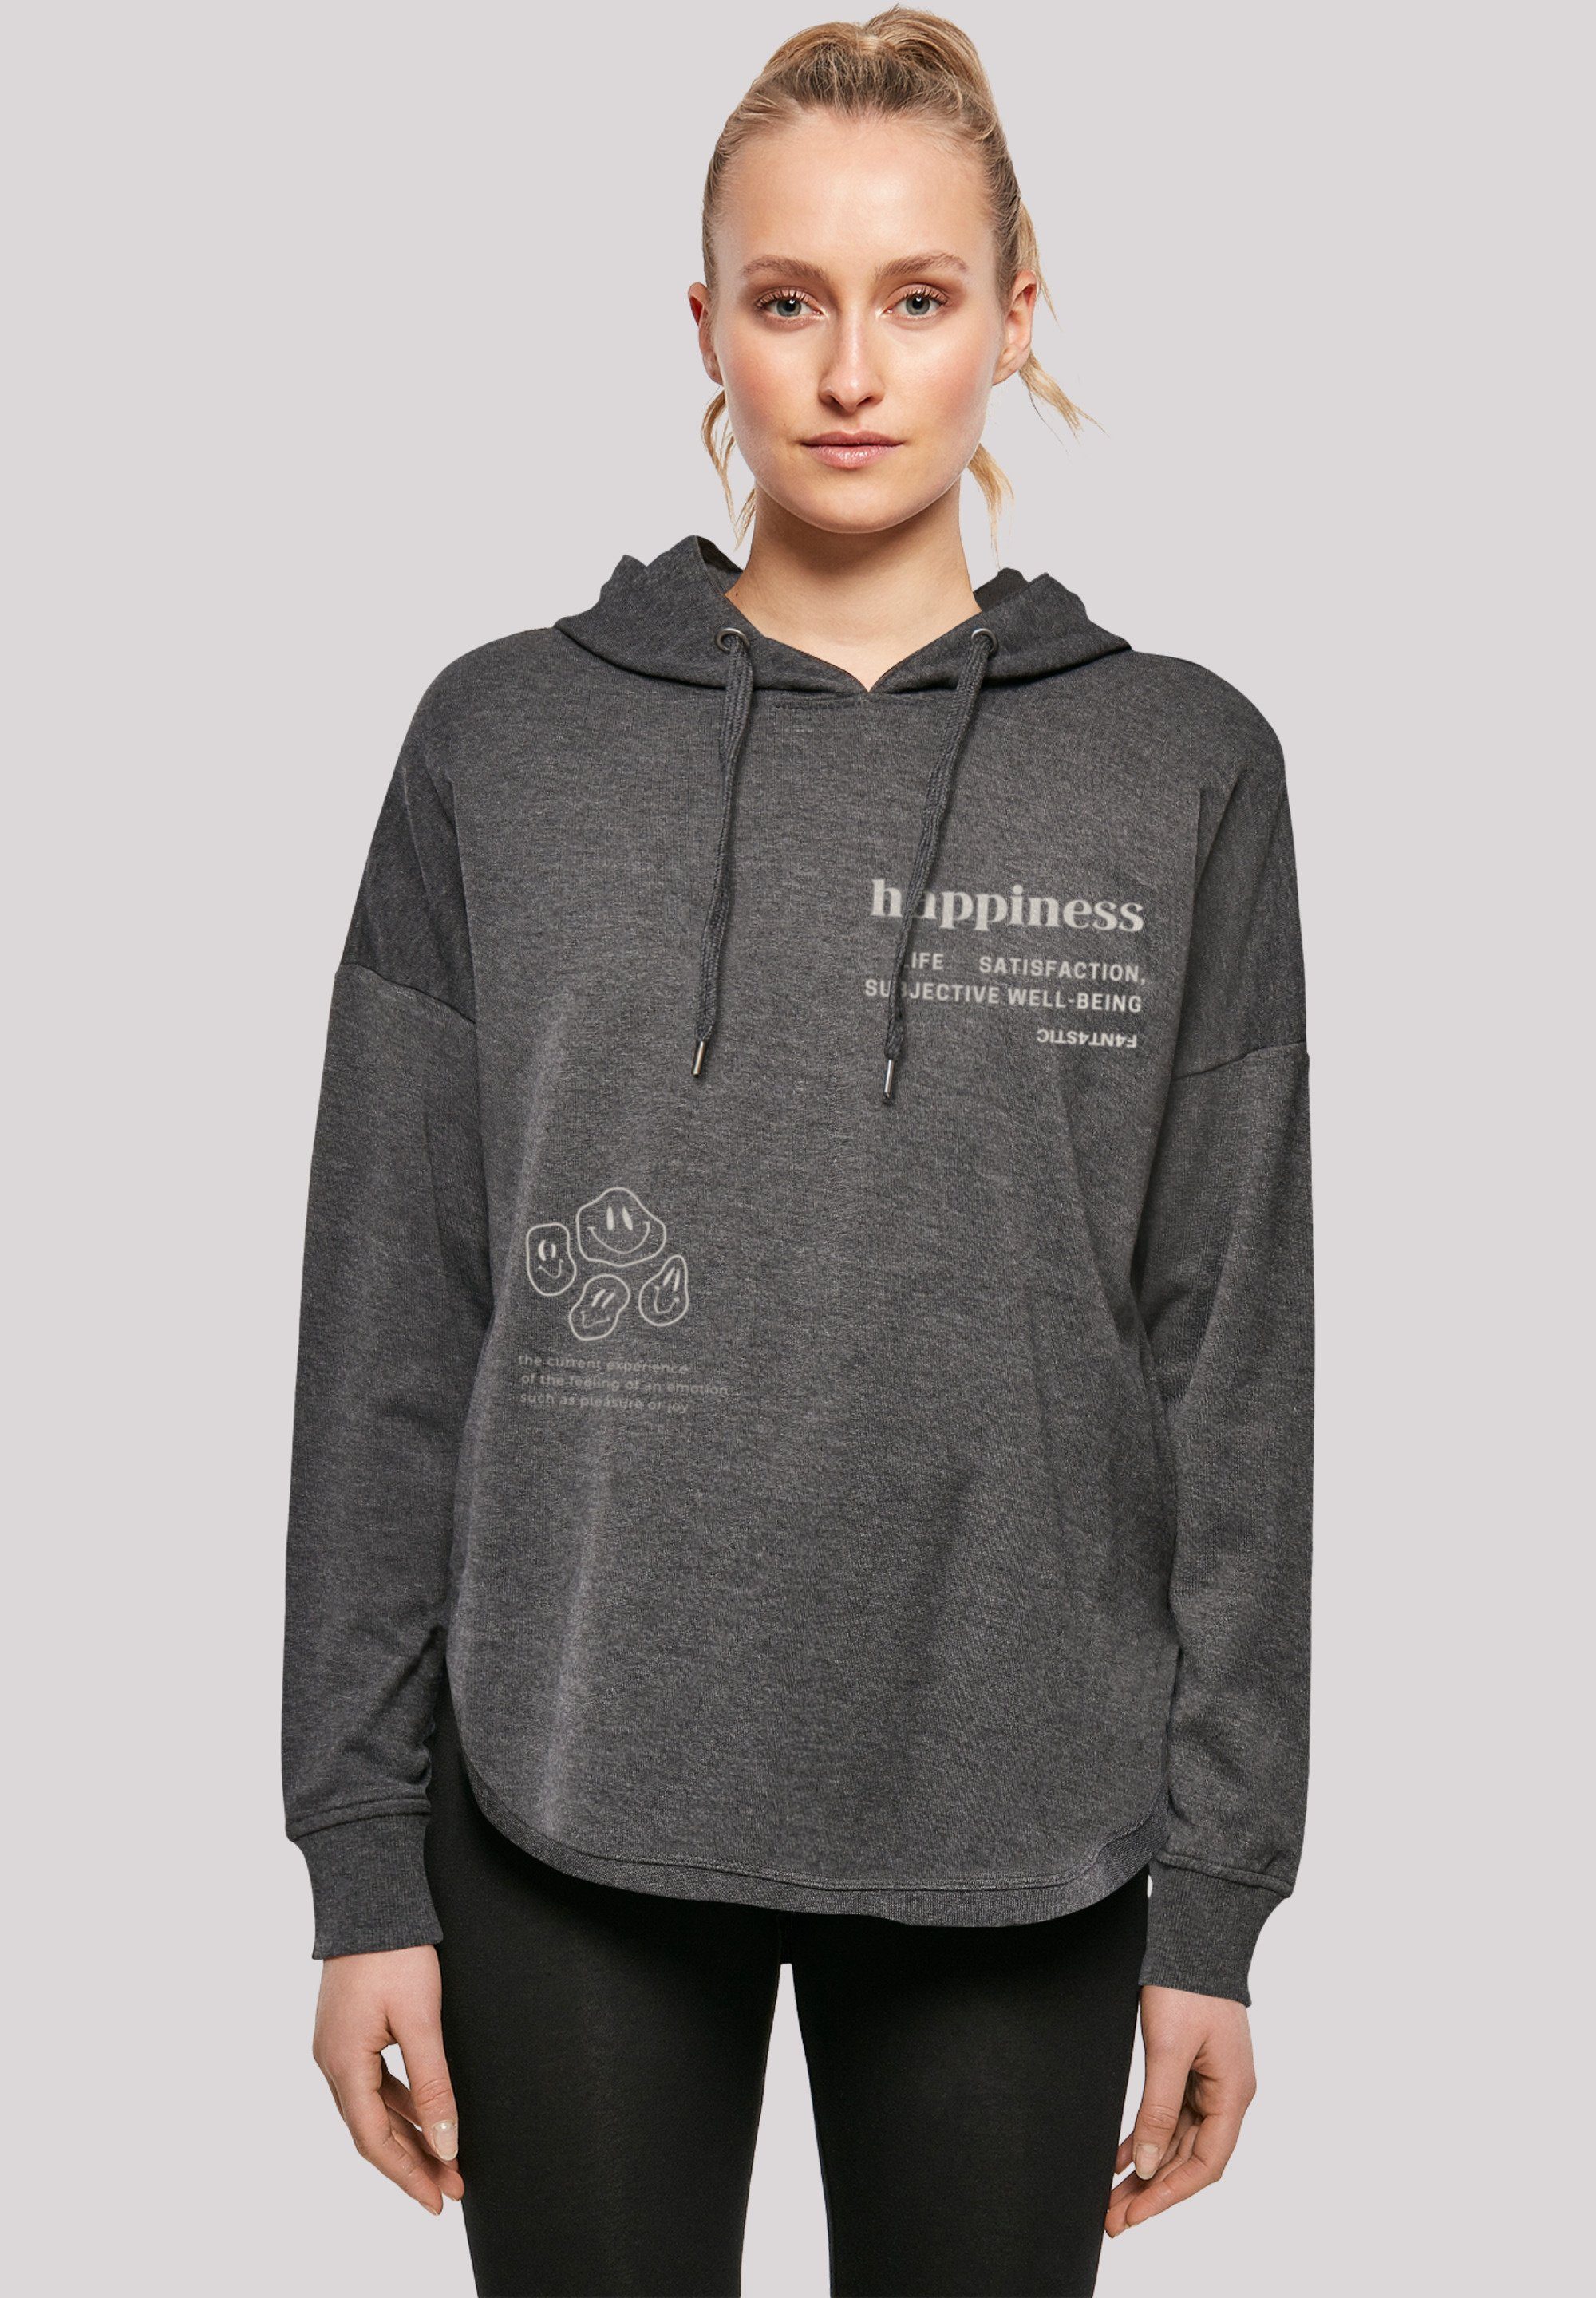 HOODIE charcoal happiness F4NT4STIC Kapuzenpullover Print OVERSIZE